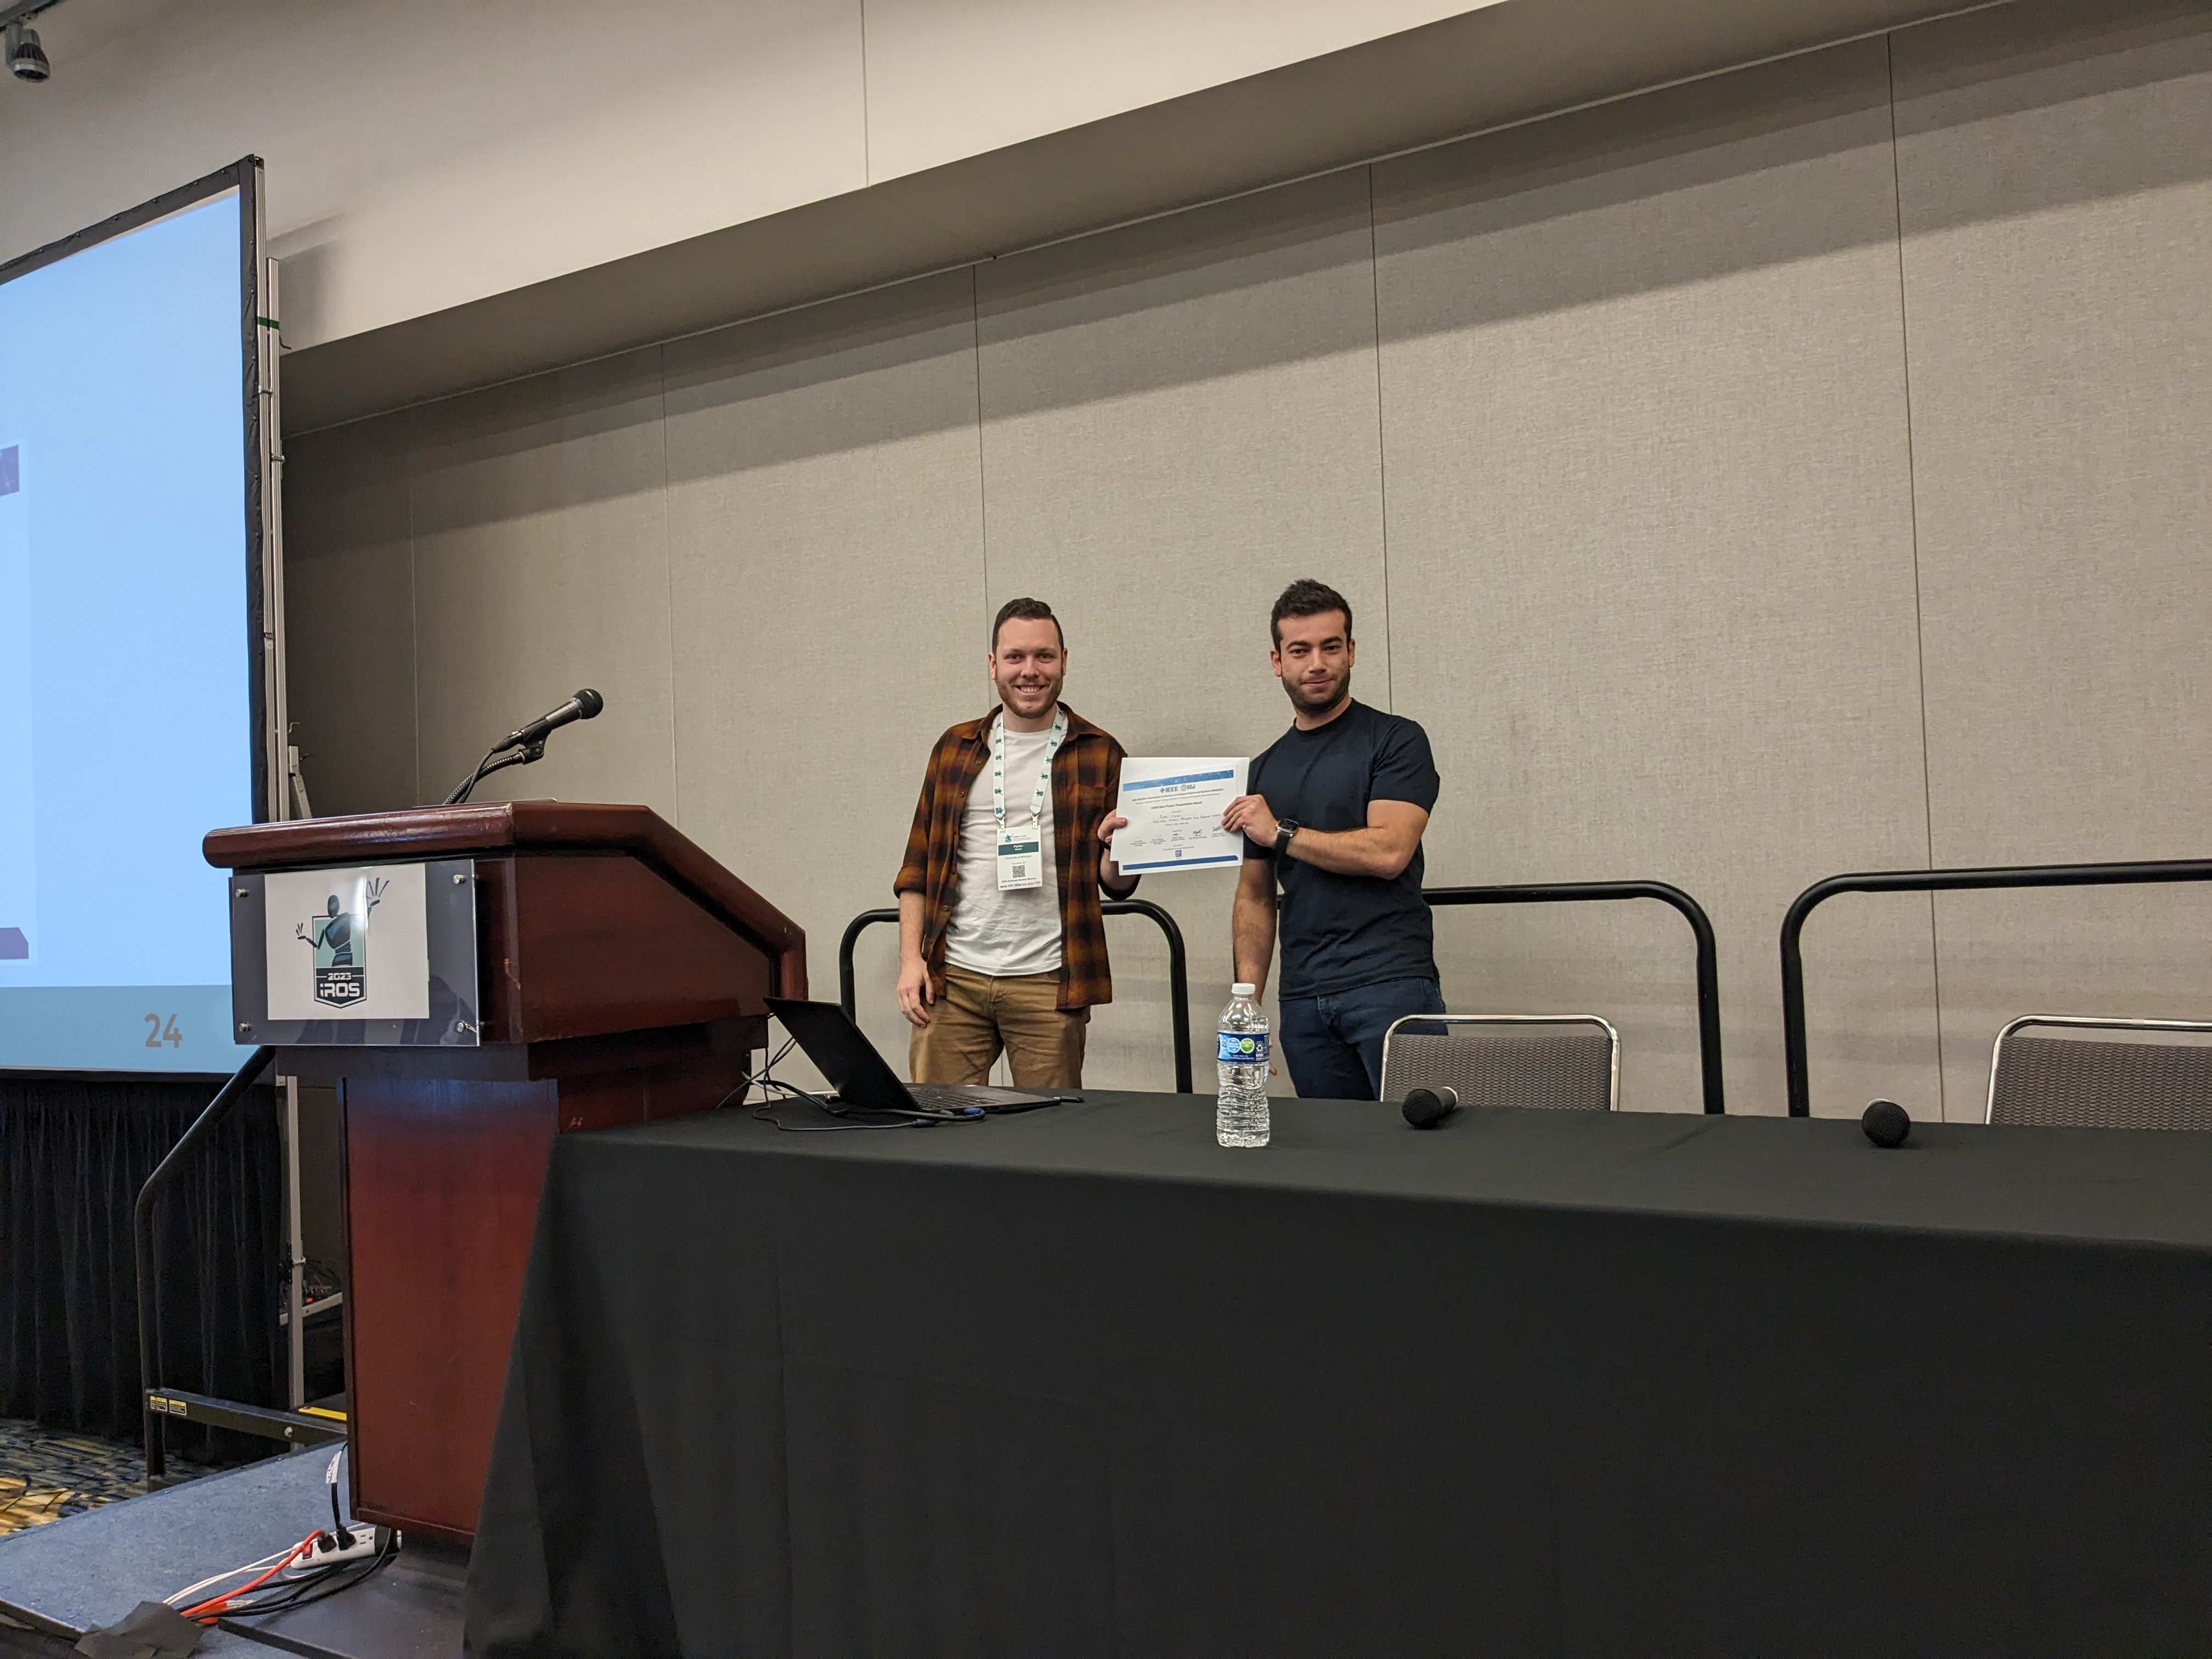 Parker Ewen (left) receiving the EAISI Best Poster Presentation Award from Rafael Papallas (right)